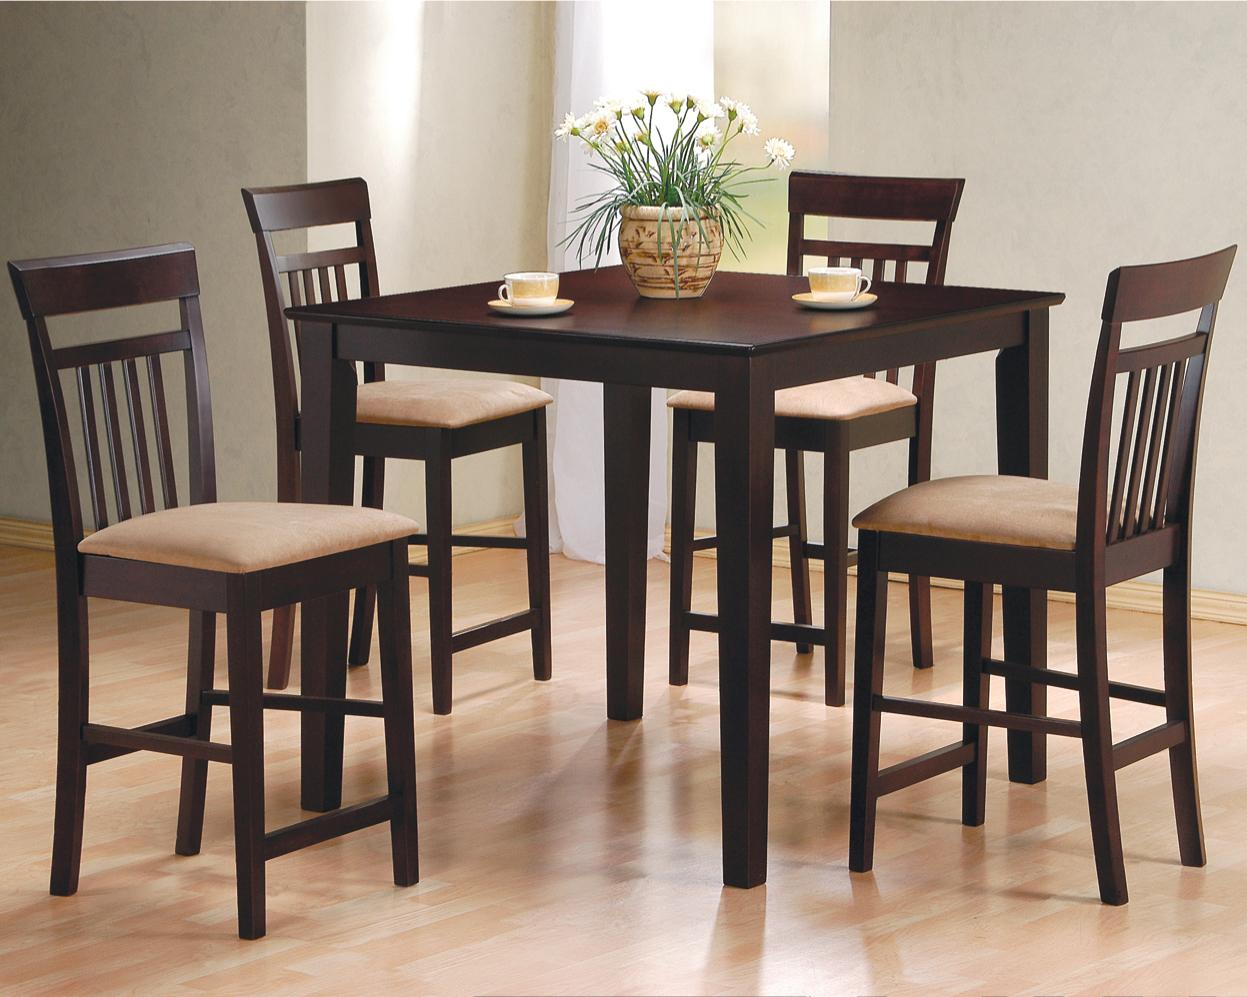 Dining Room Table Sets With Matching Bar Stools